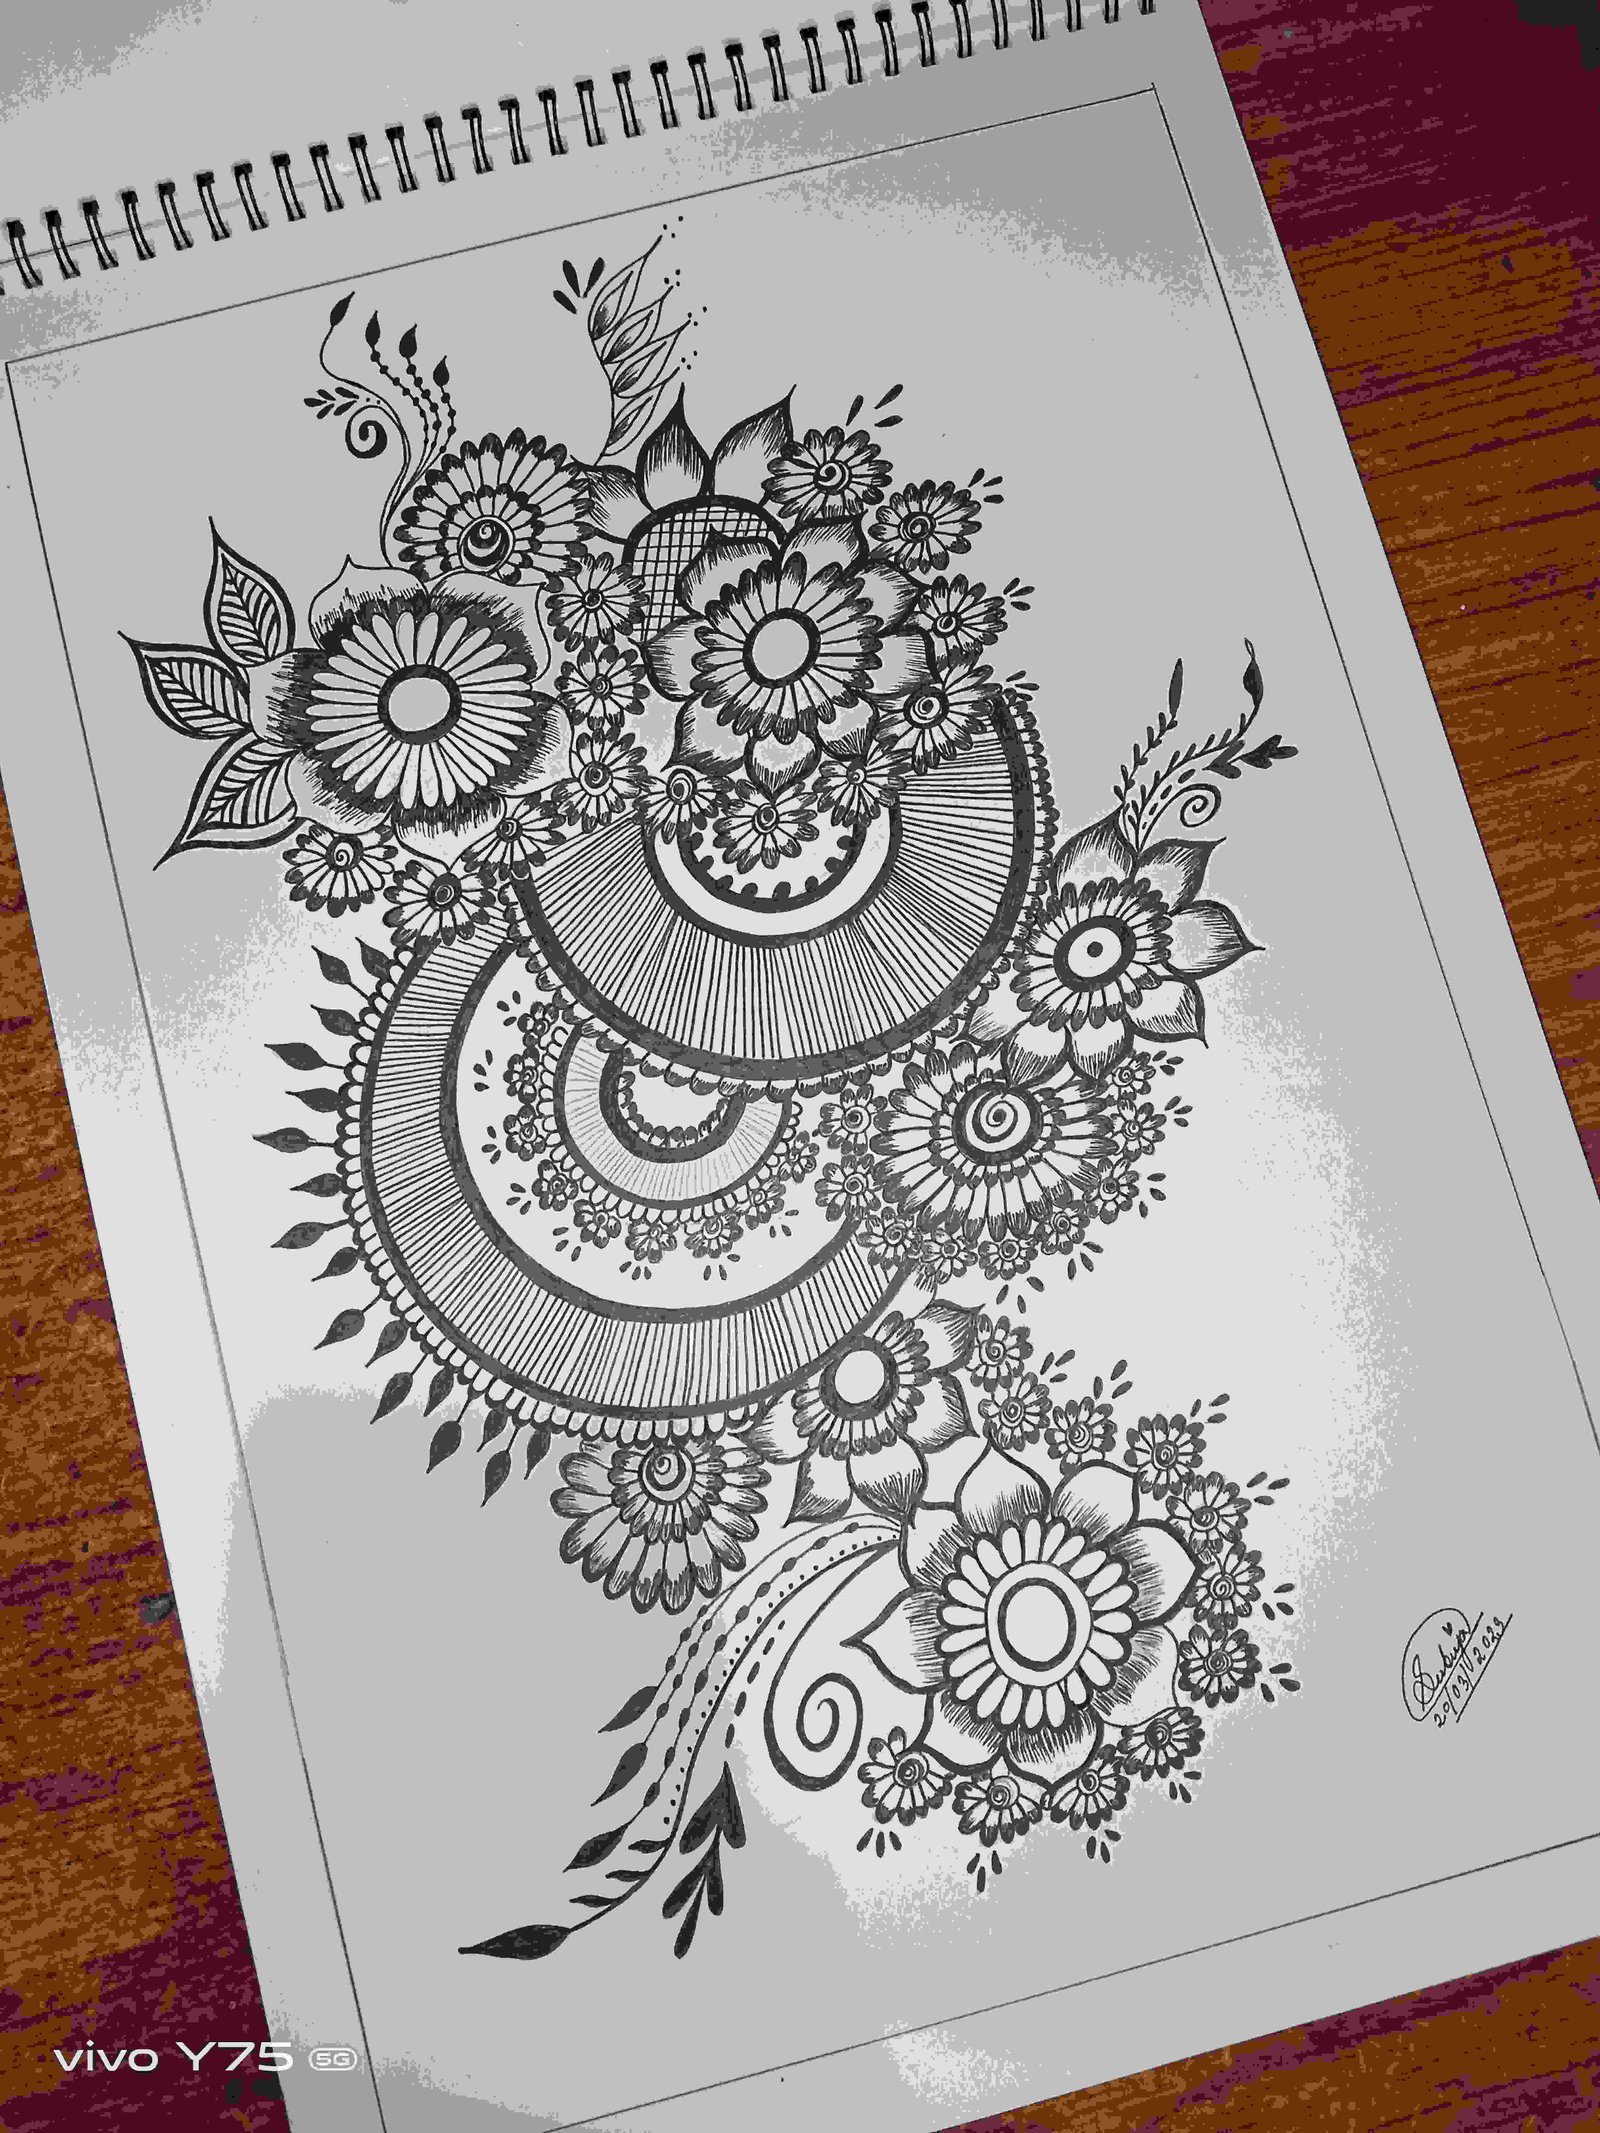 How To Do a Basic Mandala | Printable Art Lesson Plan | Downloadable – Mrs  Red's art shop